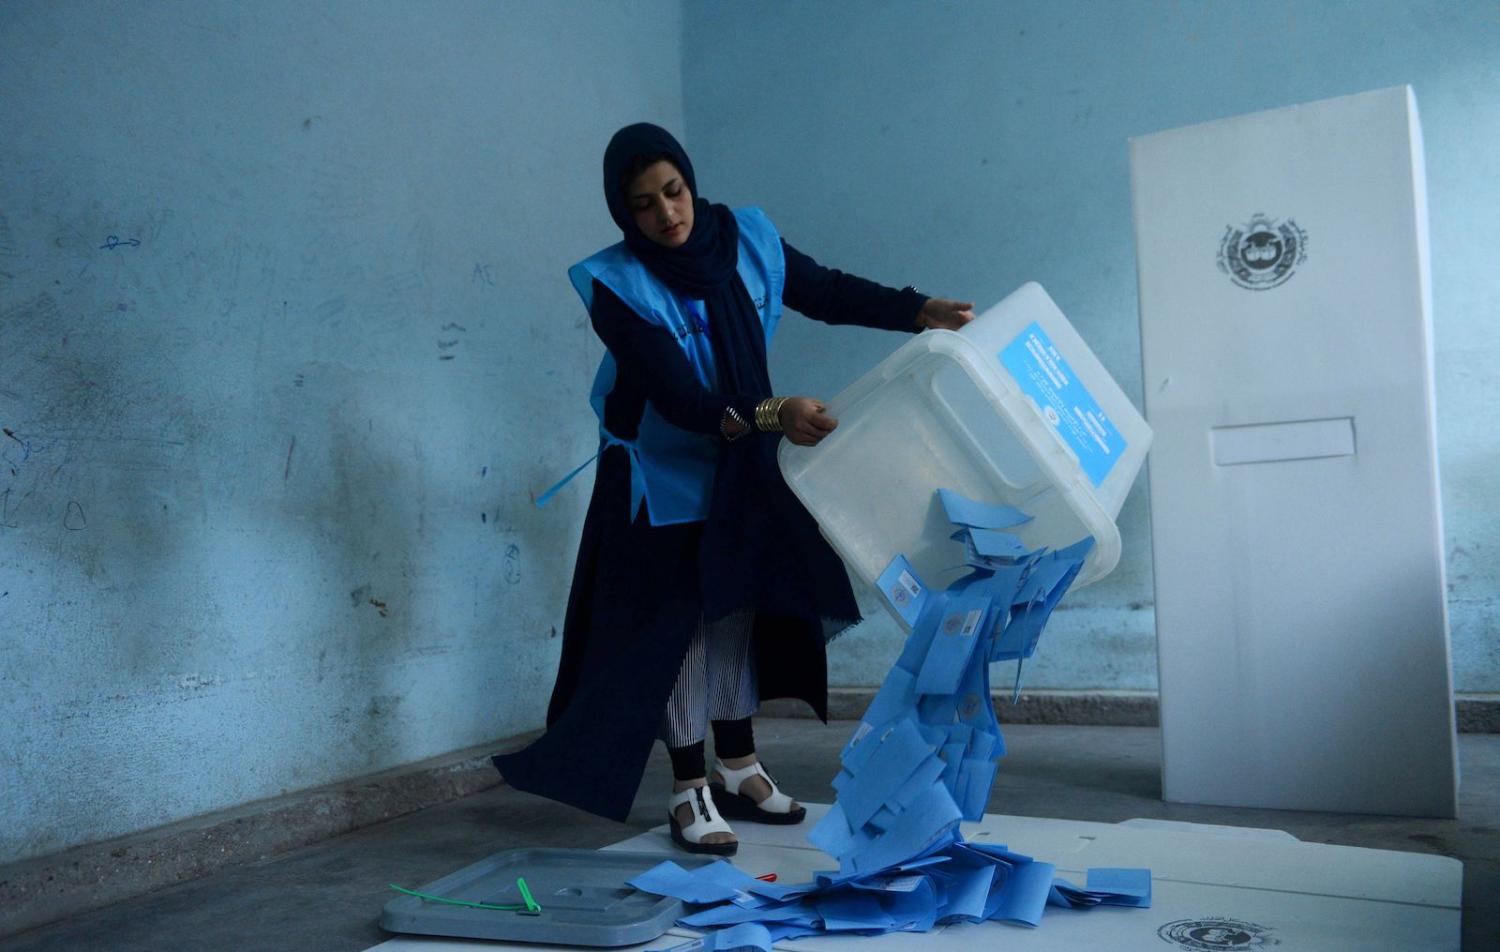 An Afghan election official empties a ballot box to count ballot papers, Herat, 28 September 2019 (Photo: Hoshang Hashimi/AFP/Getty Images)